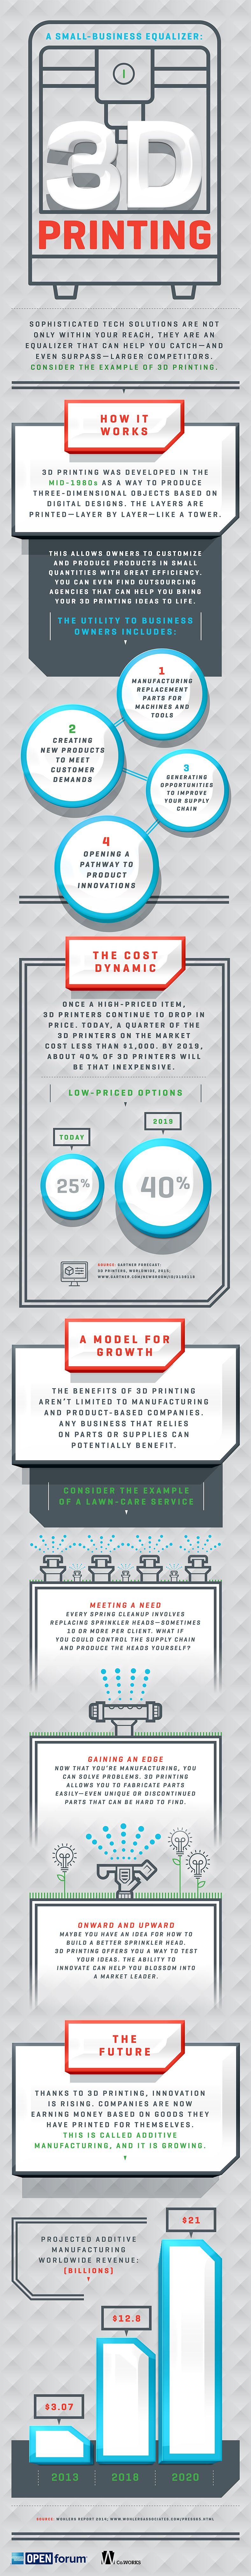 A Small-Business Equalizer: 3D Printing